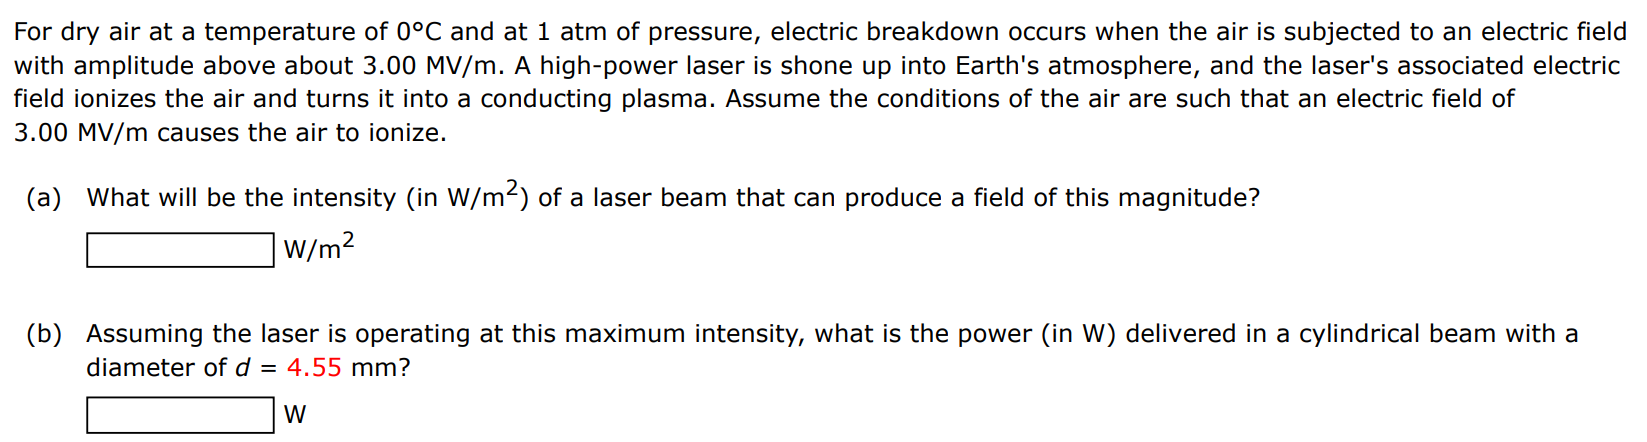 For dry air at a temperature of 0∘C and at 1 atm of pressure, electric breakdown occurs when the air is subjected to an electric field with amplitude above about 3.00 MV/m. A high-power laser is shone up into Earth's atmosphere, and the laser's associated electric field ionizes the air and turns it into a conducting plasma. Assume the conditions of the air are such that an electric field of 3.00 MV/m causes the air to ionize. (a) What will be the intensity (in W/m2) of a laser beam that can produce a field of this magnitude? W/m2 (b) Assuming the laser is operating at this maximum intensity, what is the power (in W) delivered in a cylindrical beam with a diameter of d = 4.55 mm? W